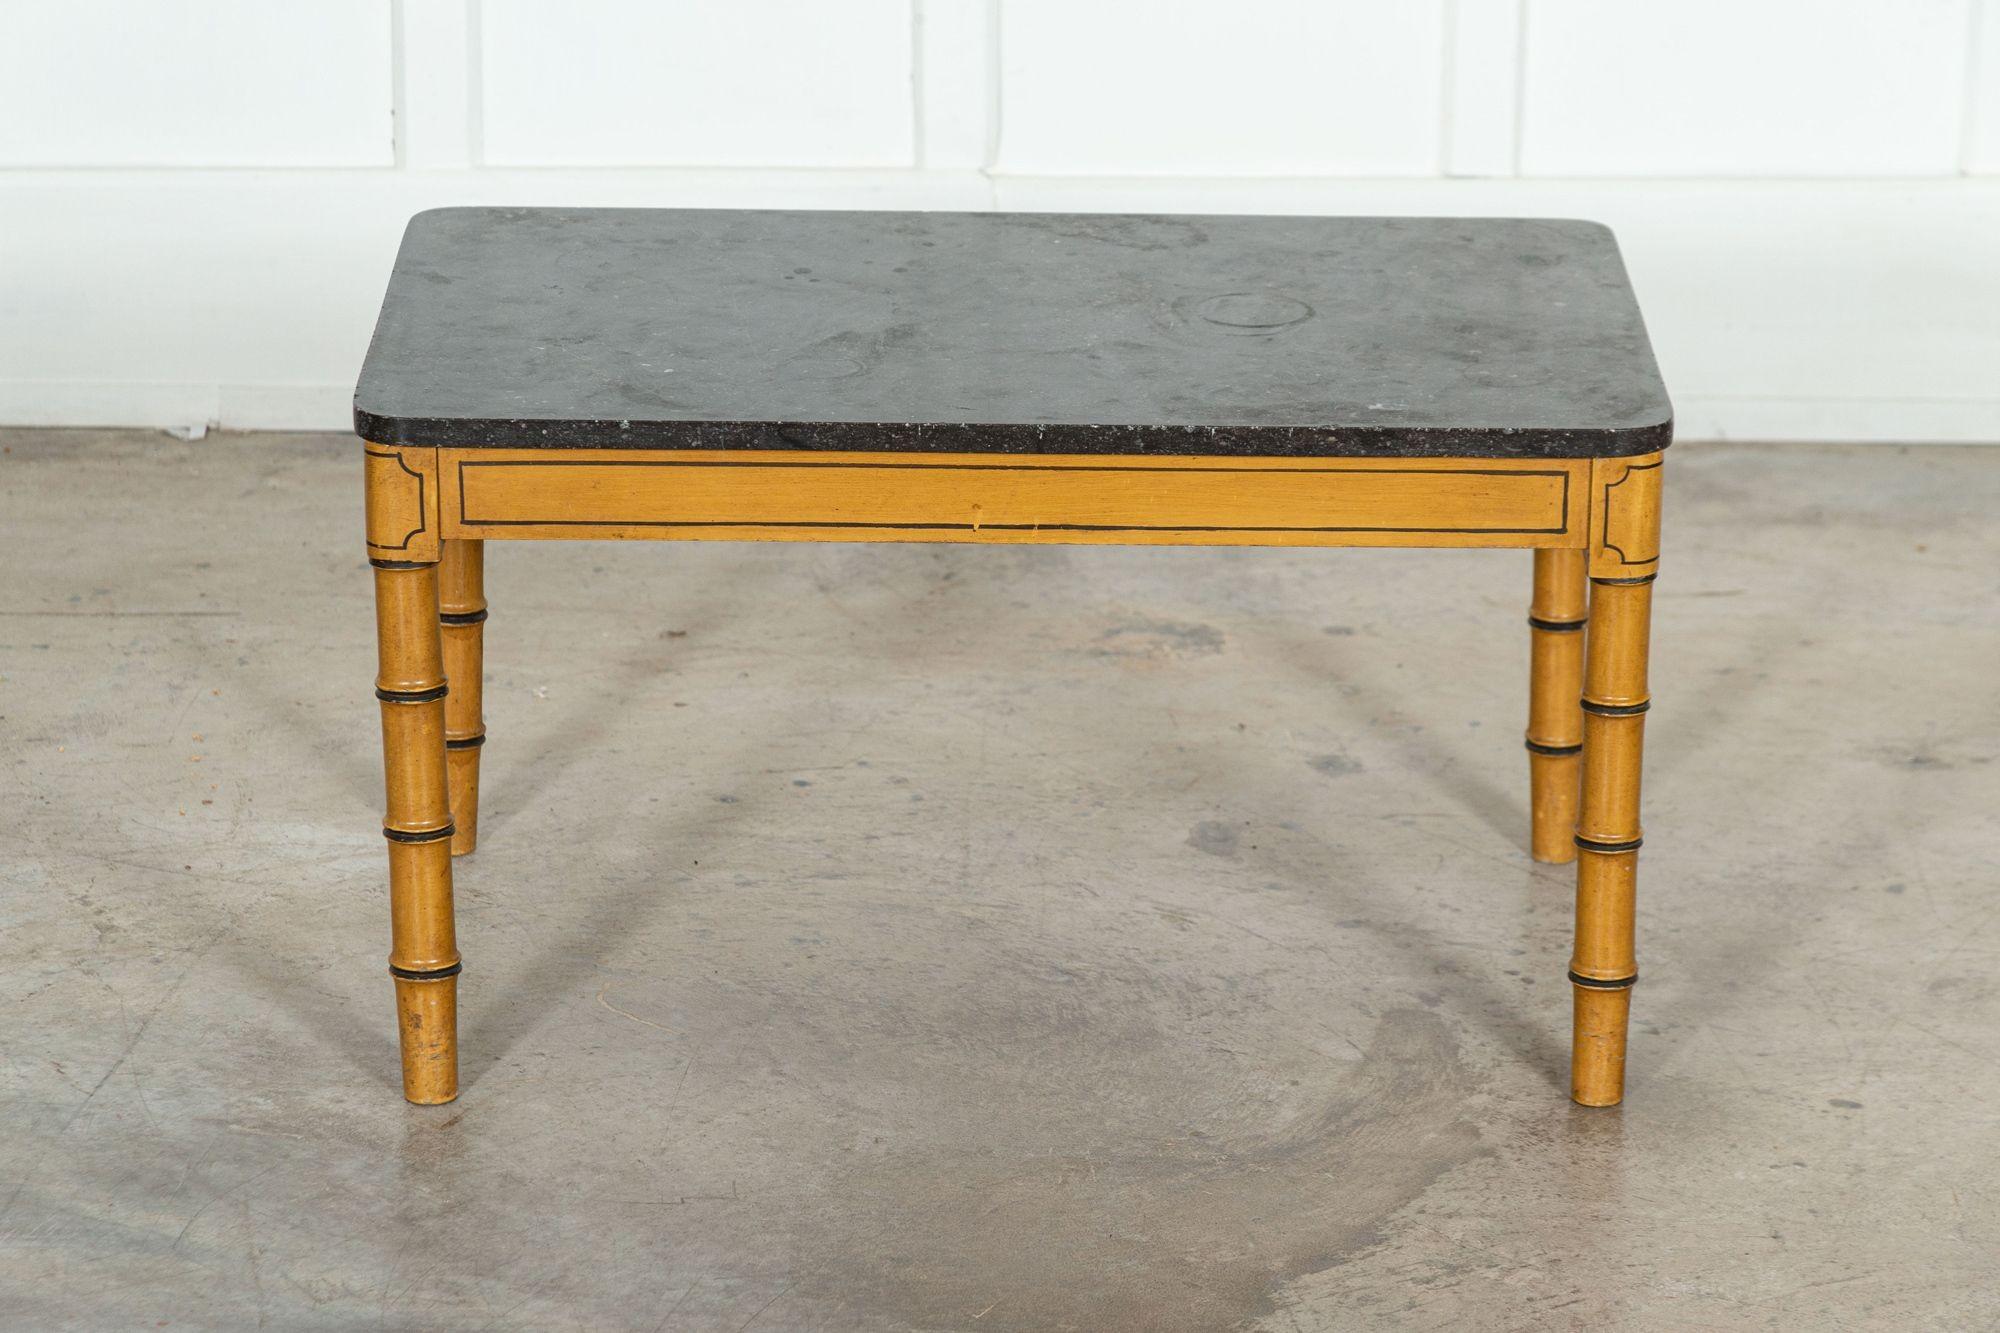 circa 1850
19th century English Faux Bamboo & Marble Painted Beech Coffee Table
W76 x D46 x H43 cm.